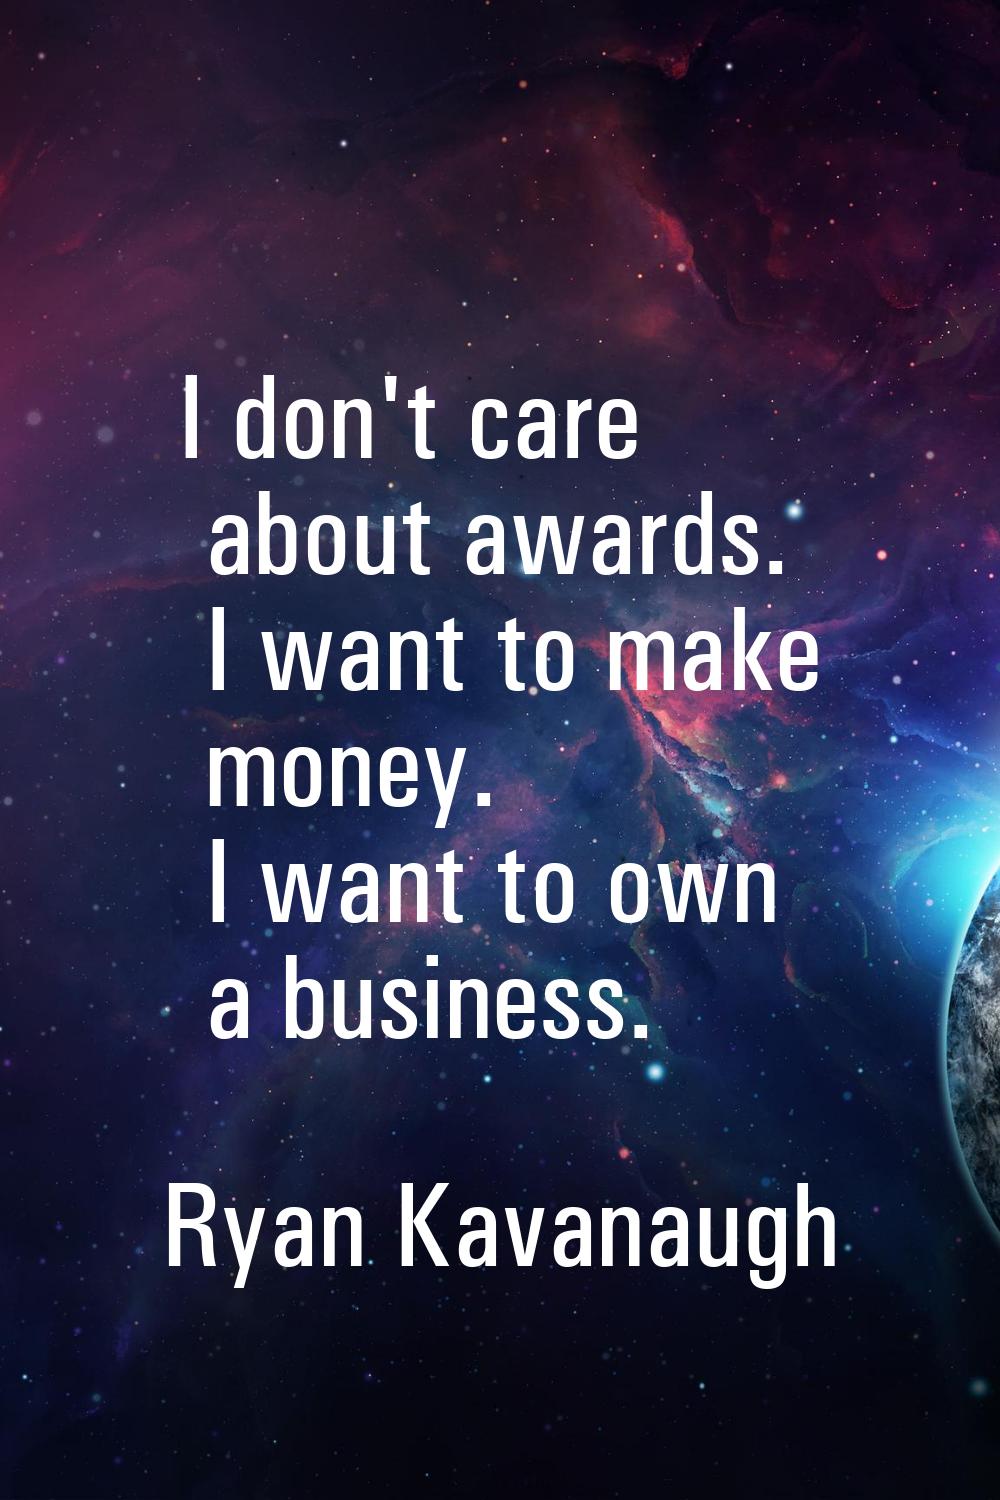 I don't care about awards. I want to make money. I want to own a business.